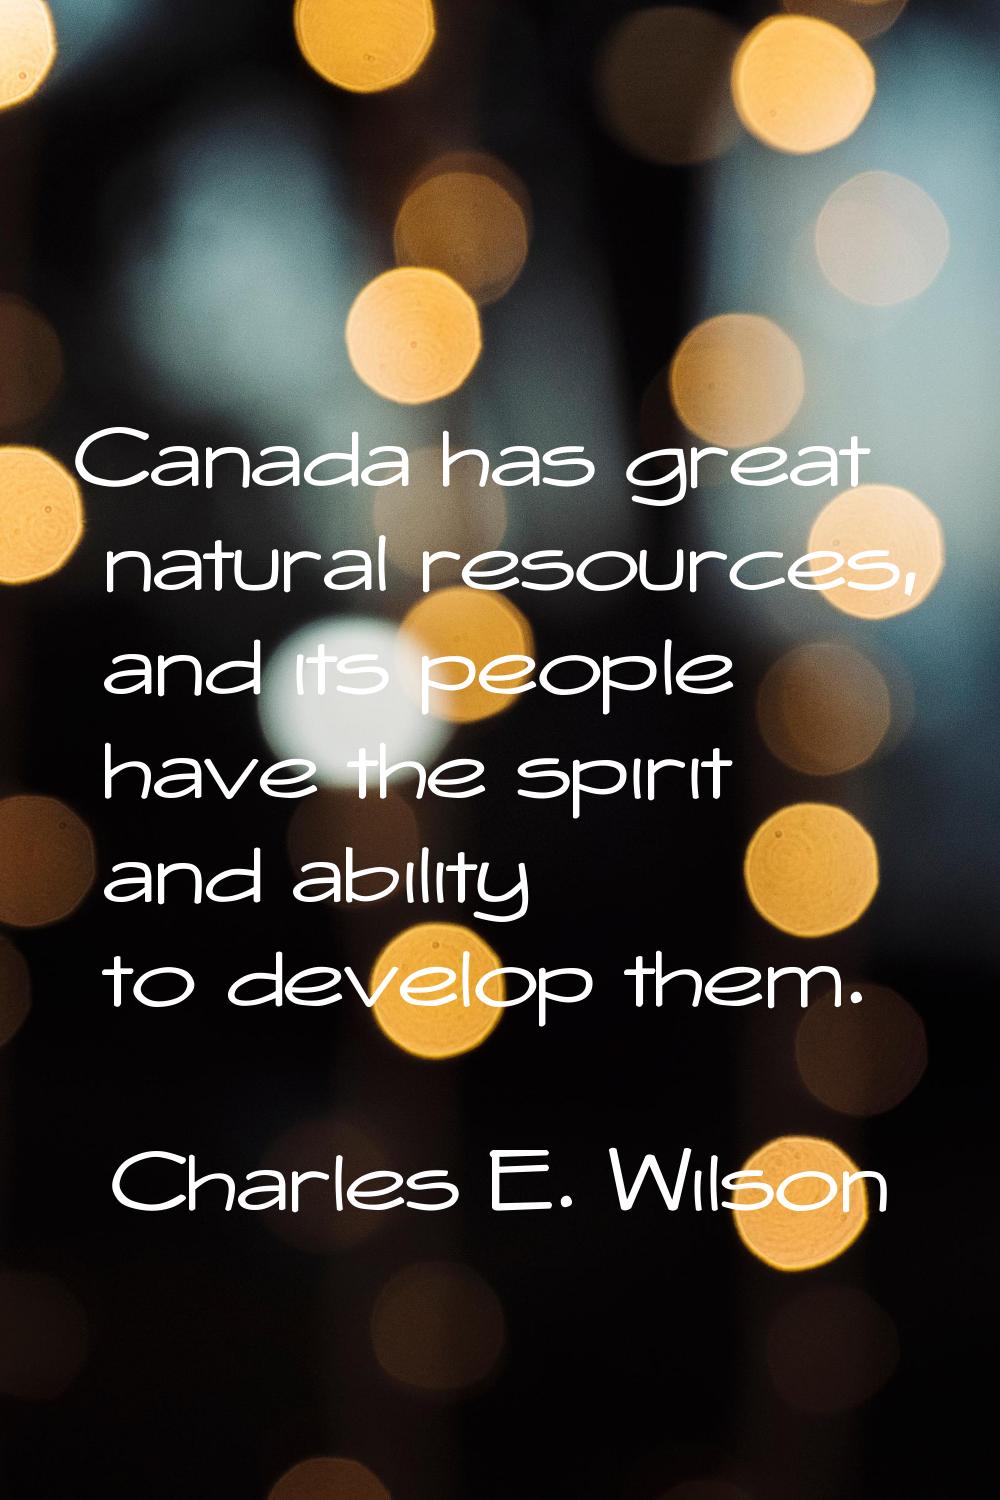 Canada has great natural resources, and its people have the spirit and ability to develop them.